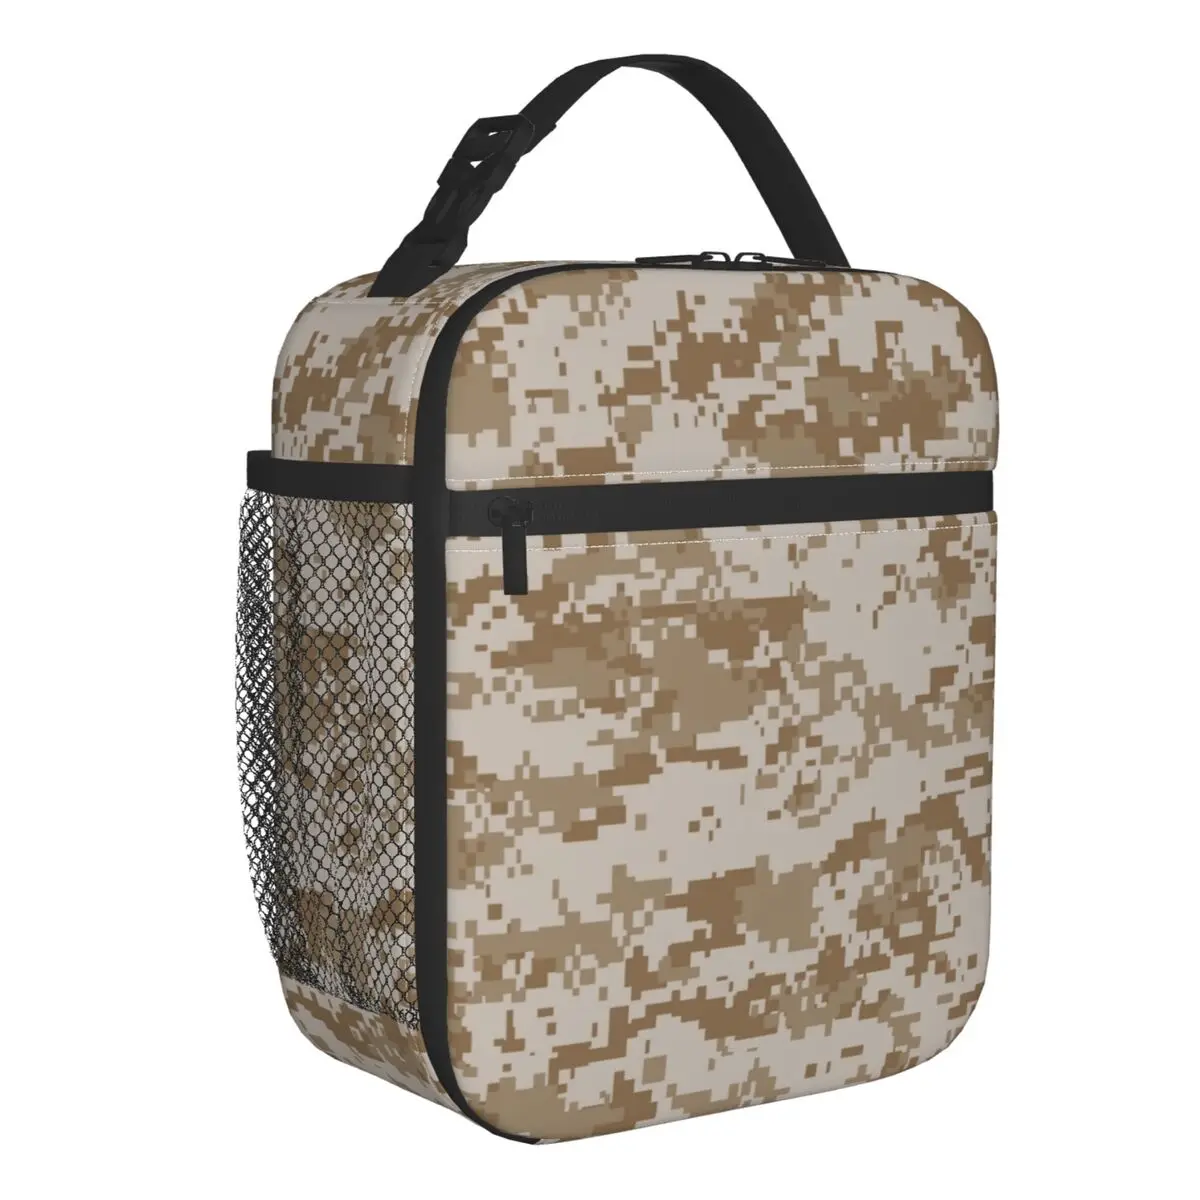 Digital Desert Camo Insulated Lunch Bag for Work School Military Army Camouflage Portable Thermal Cooler Lunch Box Women Kids